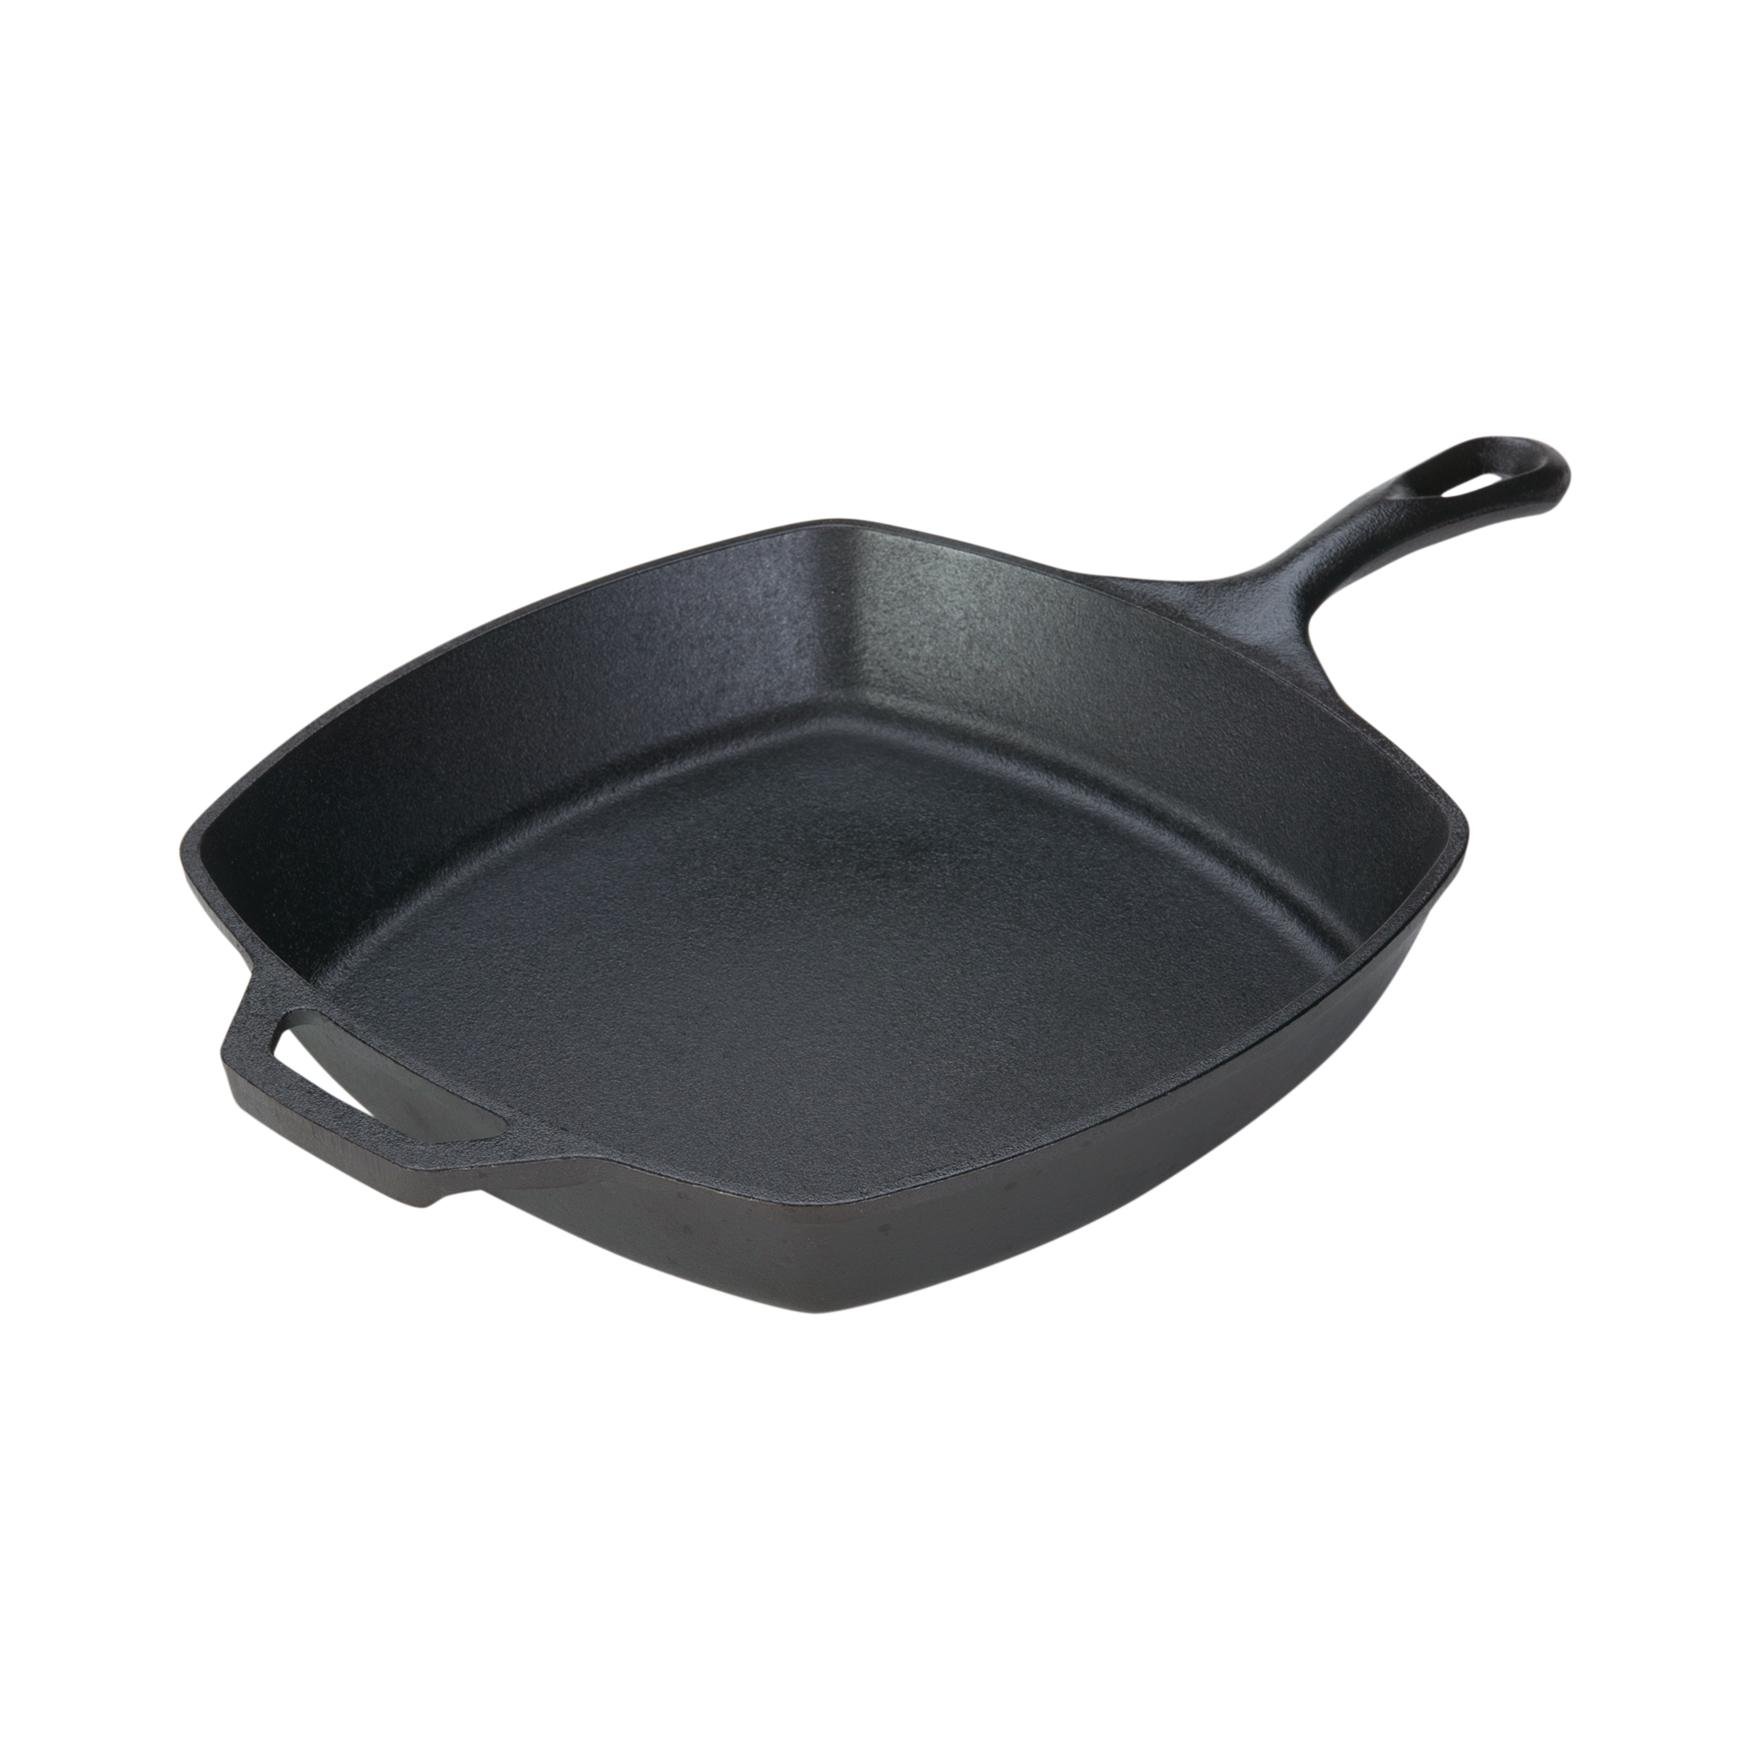 NEW Country Cabin 12” inch Preseasoned Cast Iron Skillet